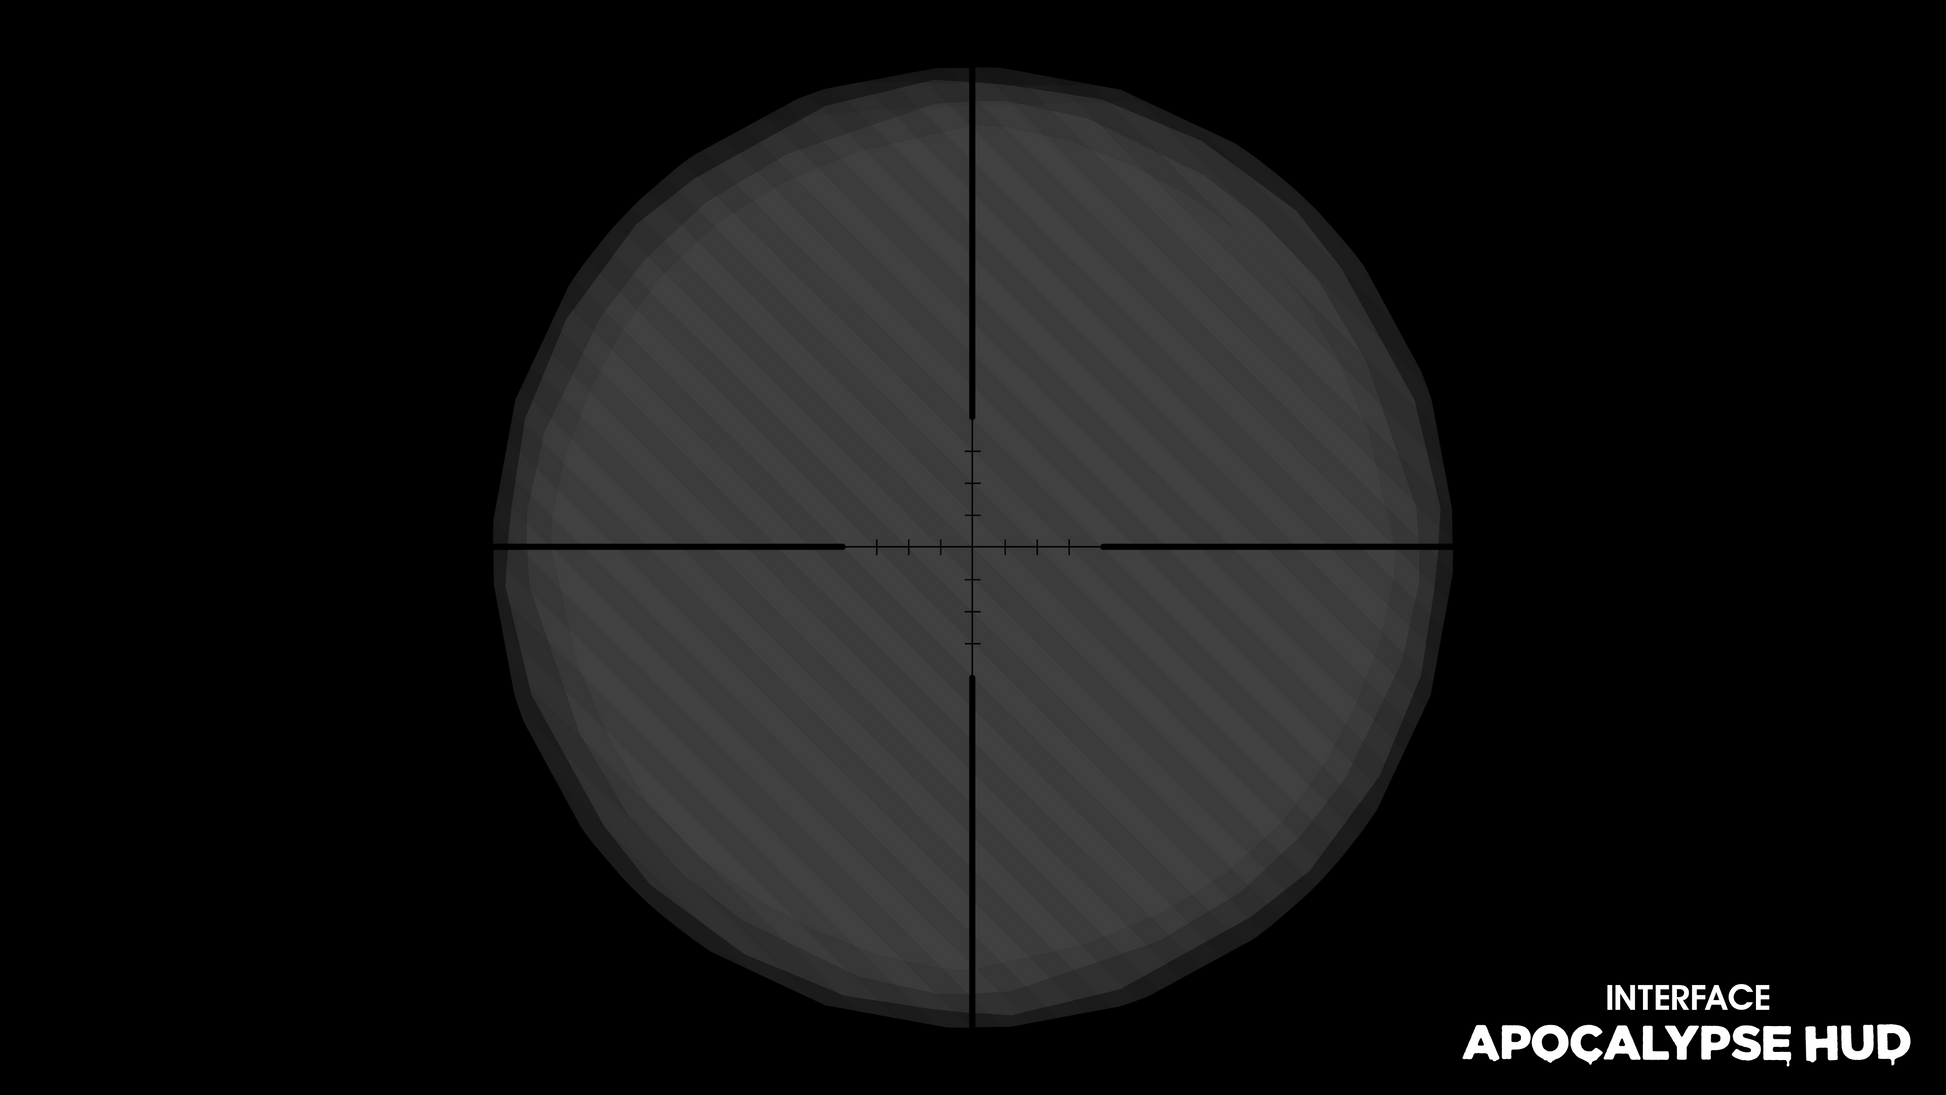 INTERFACE Apocalypse HUD UI asset pack displaying scope sprites for first person shooting games